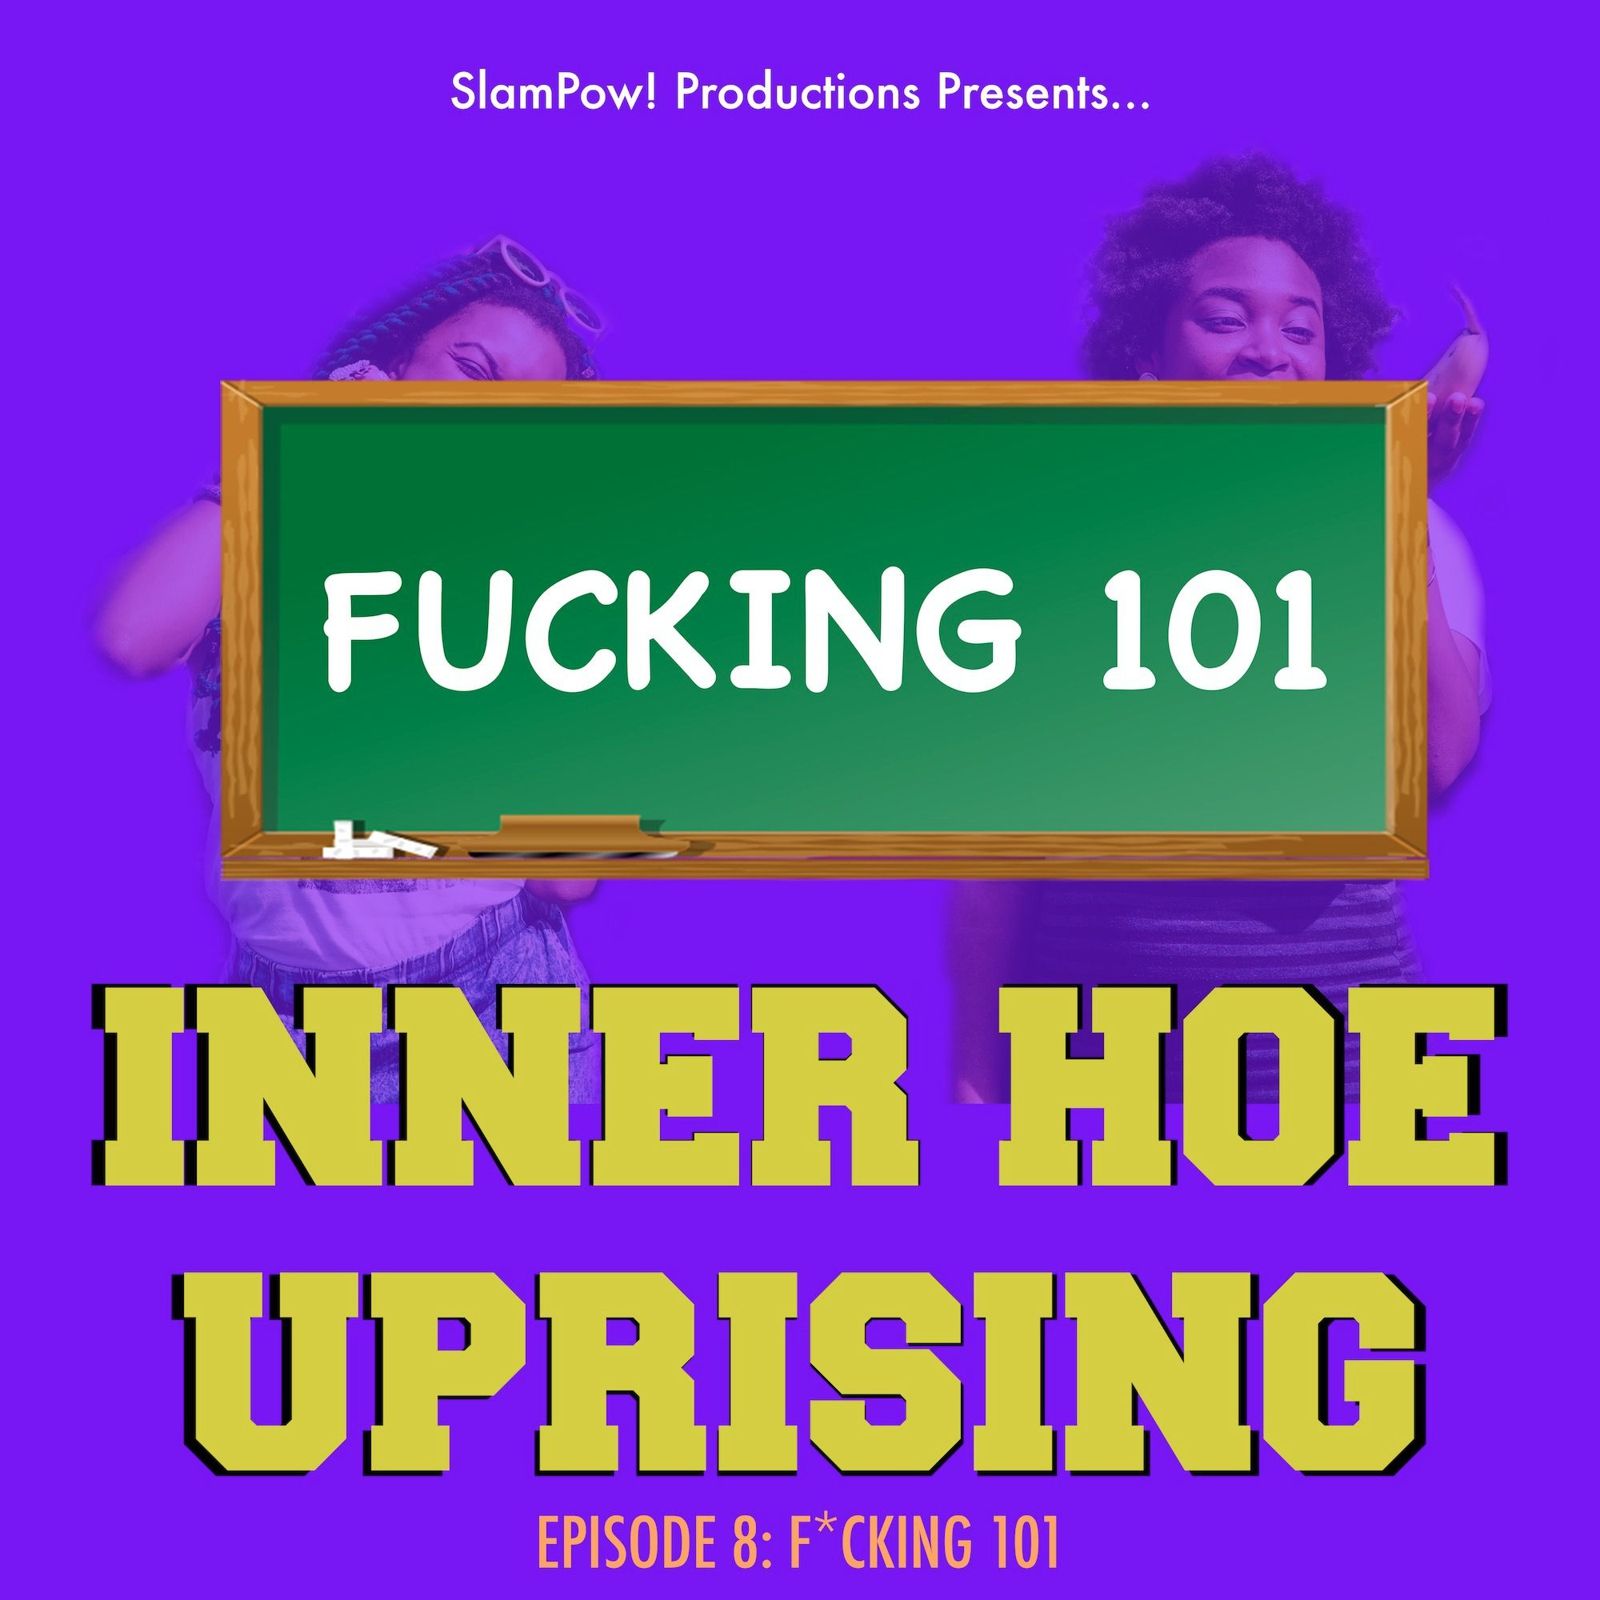 Thumbnail for "S1 Ep8: F*cking 101".